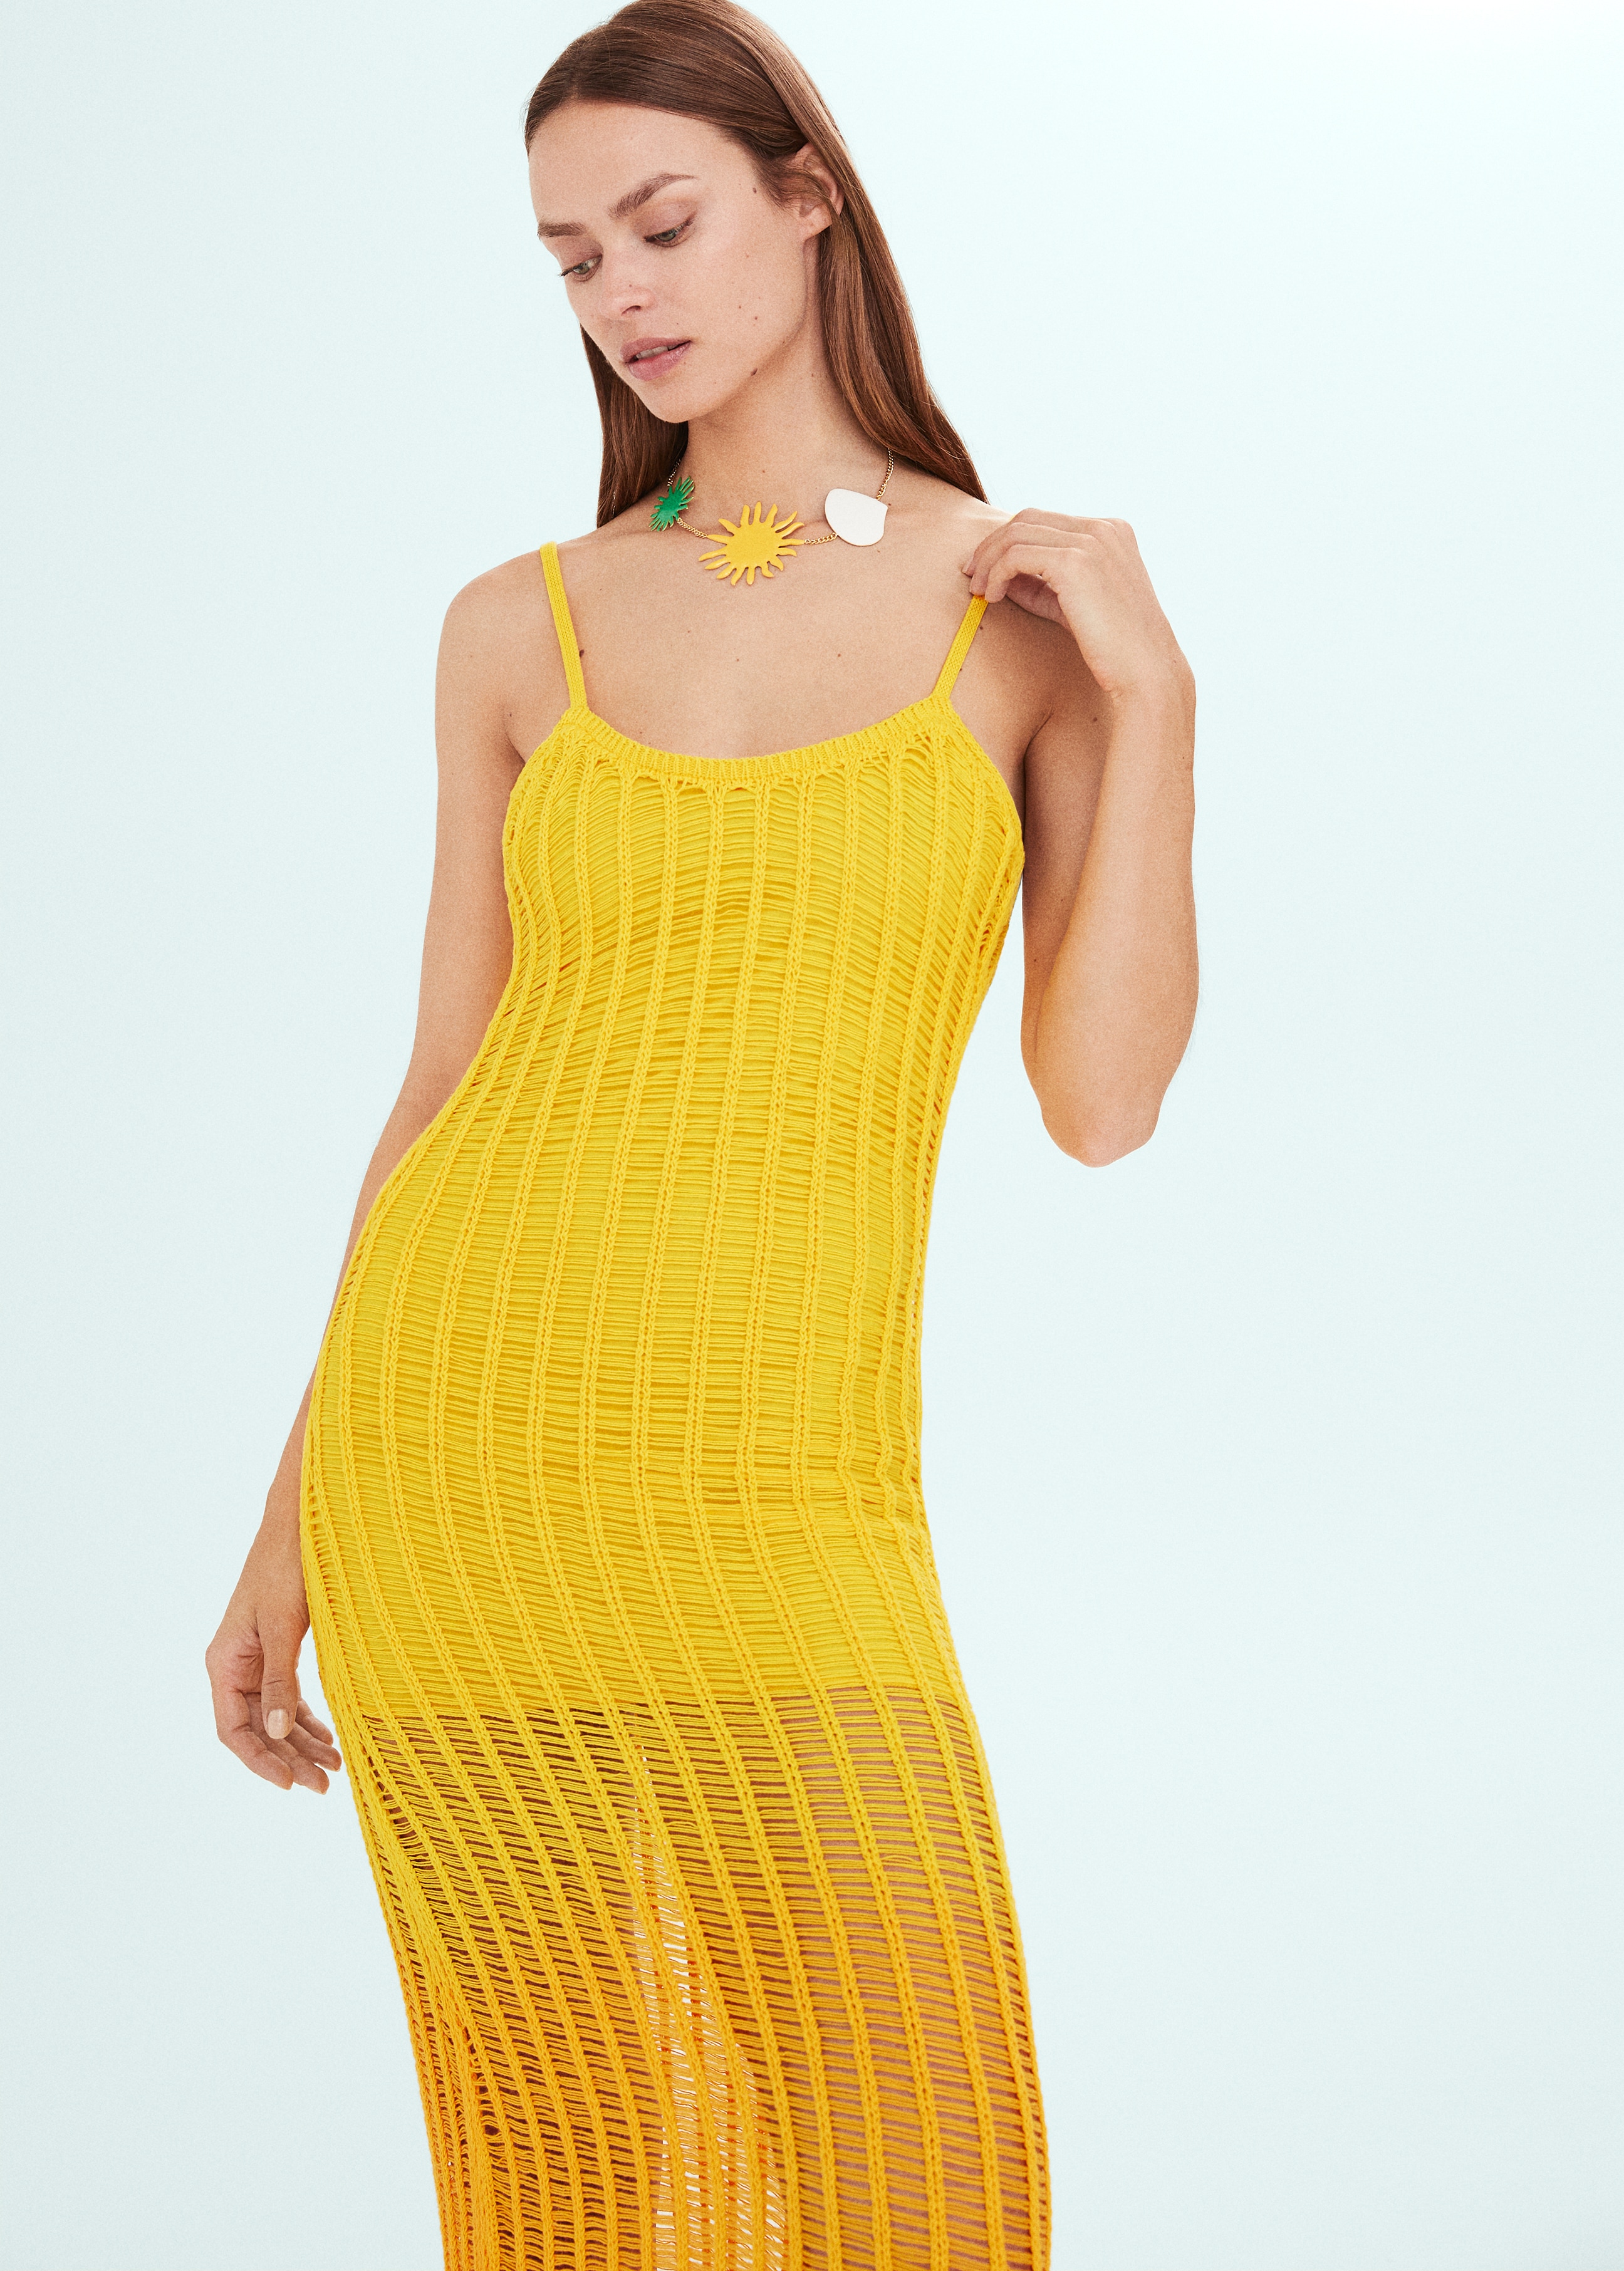 Knitted dress with openwork panels - Medium plane